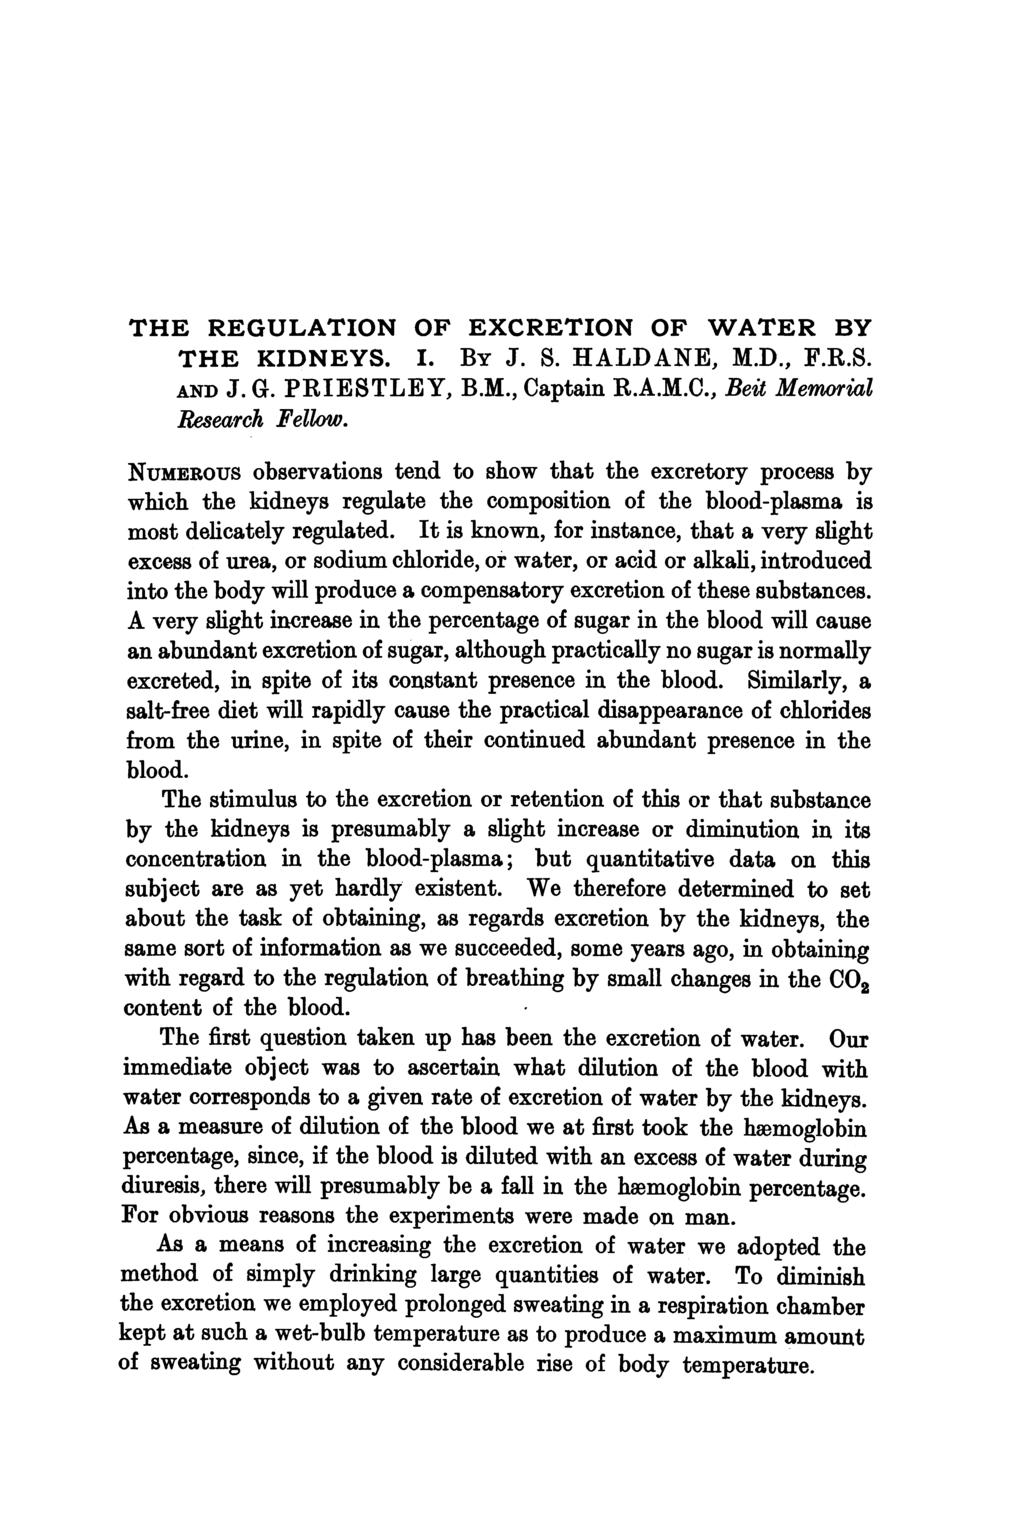 THE REGULATION OF EXCRETION OF WATER BY THE KIDNEYS. I. By J. S. HALDANE, M.D., F.R.S. AND J. G. PRIESTLEY, B.M., Captain R.A.M.C., Beit Memorial Research Fellow.